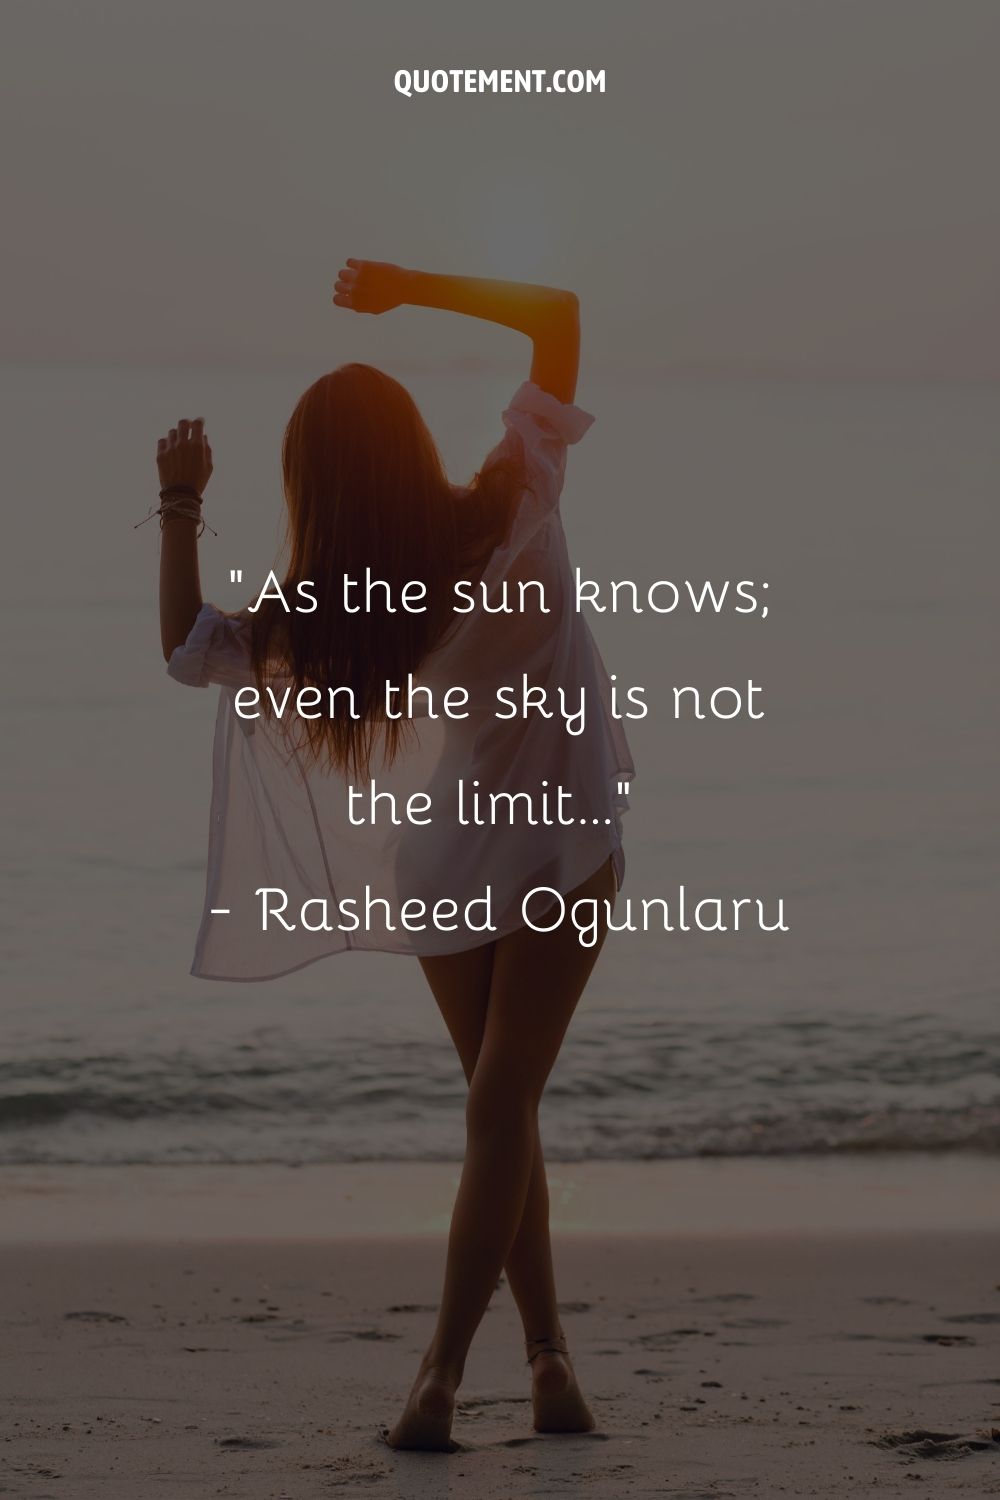 As the sun knows; even the sky is not the limit.